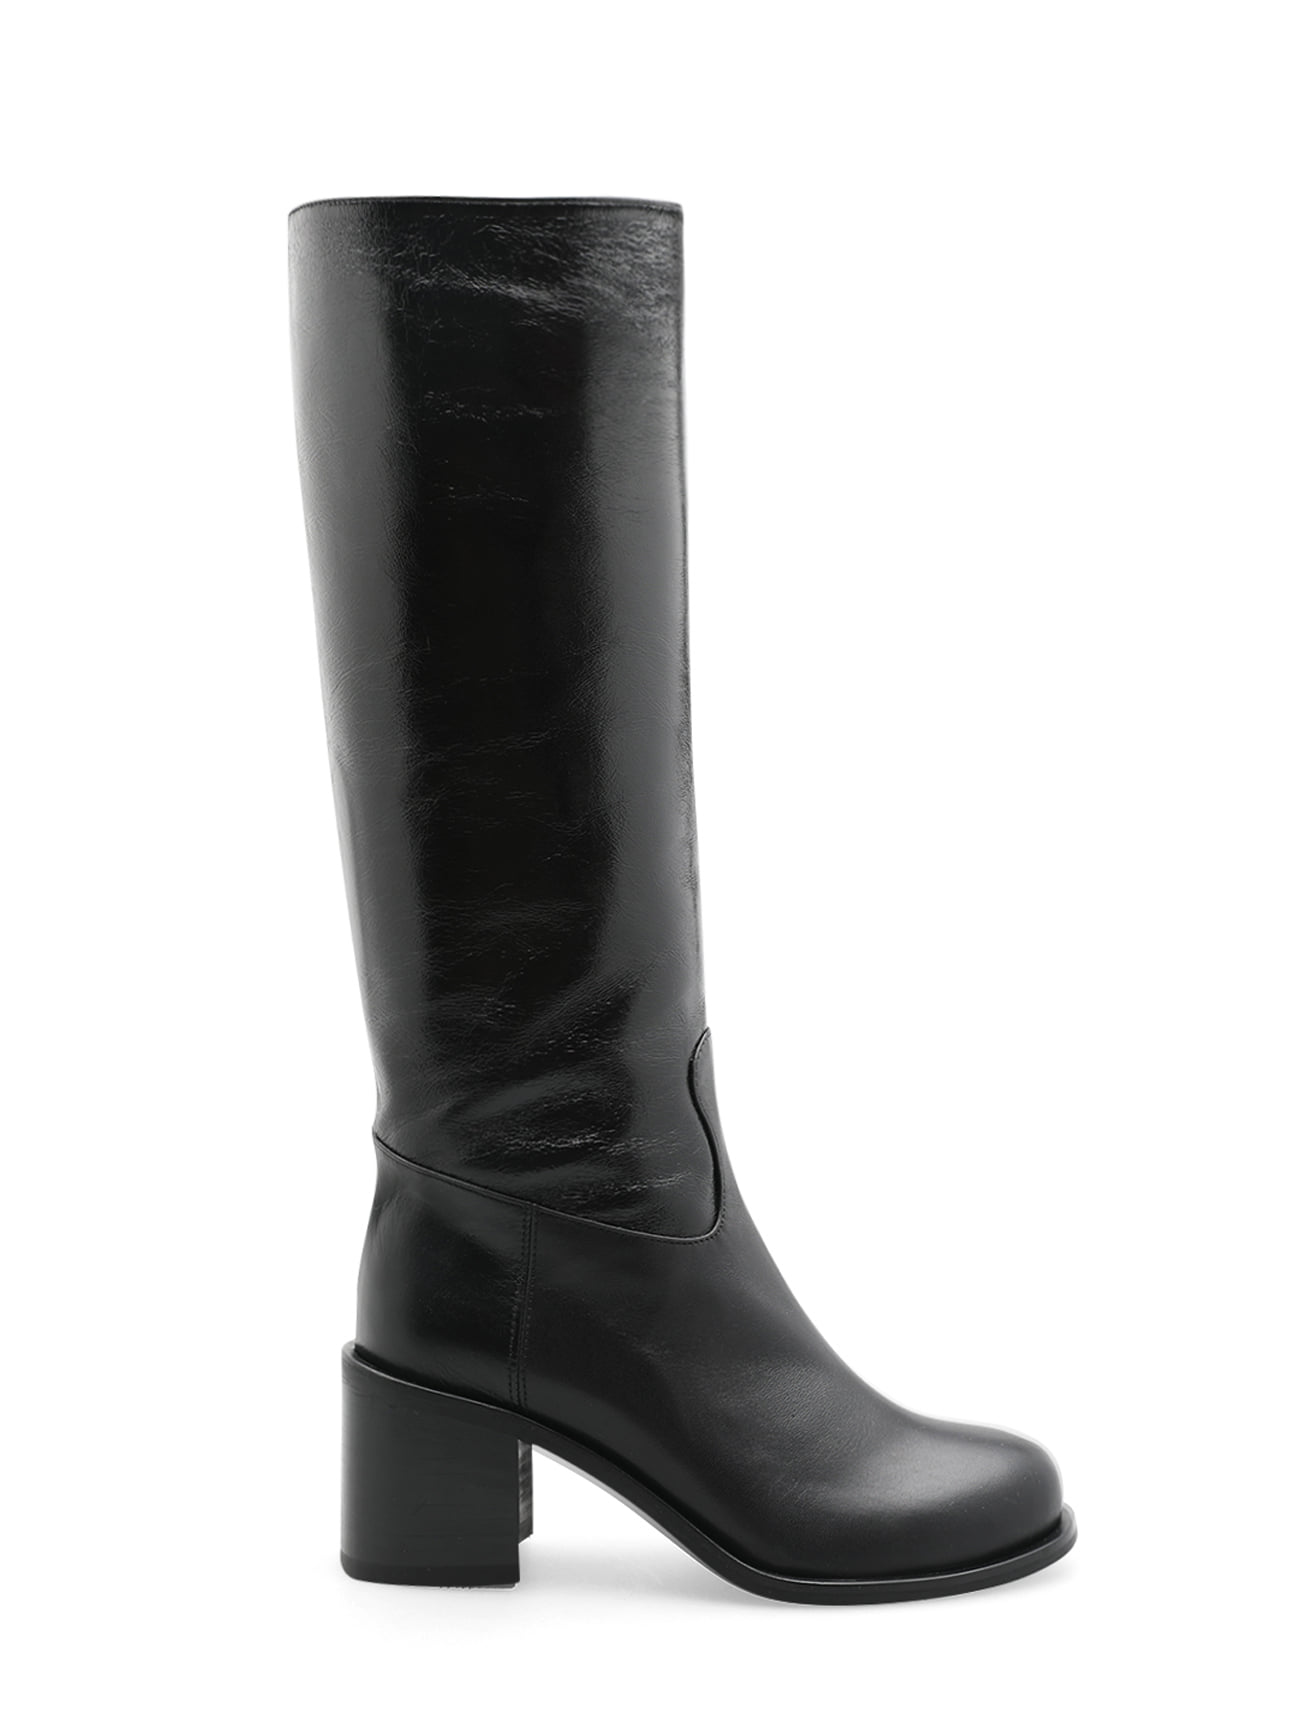 MARGARET CLASSIC KNEE HIGH BOOTS - BLACK